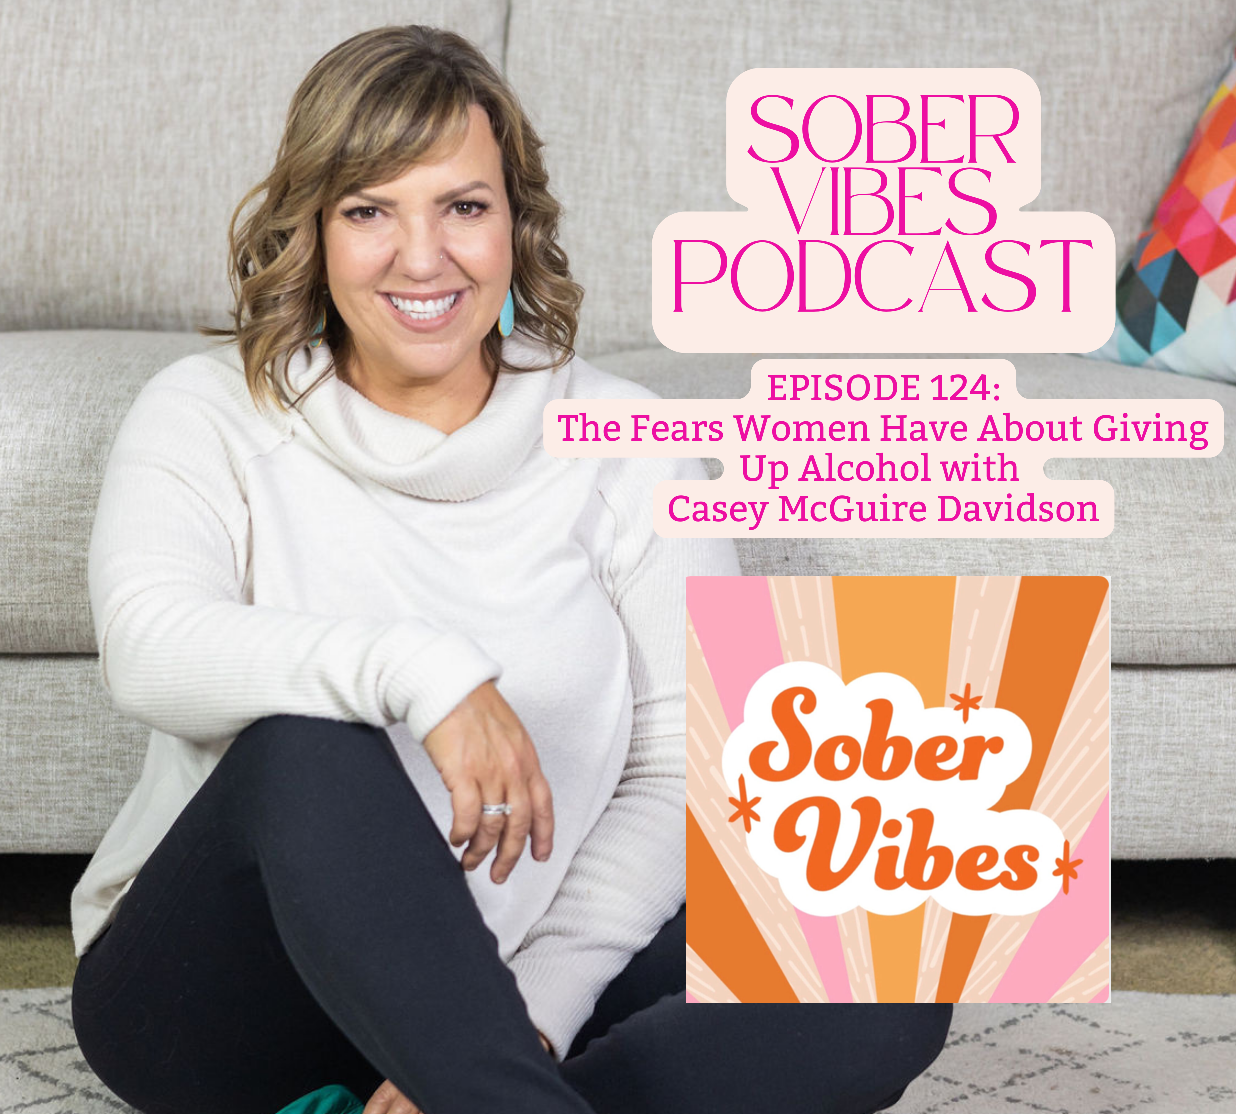 Sober Vibes Podcast - The Fears Women Have About Giving Up Alcohol with Casey McGuire Davidson